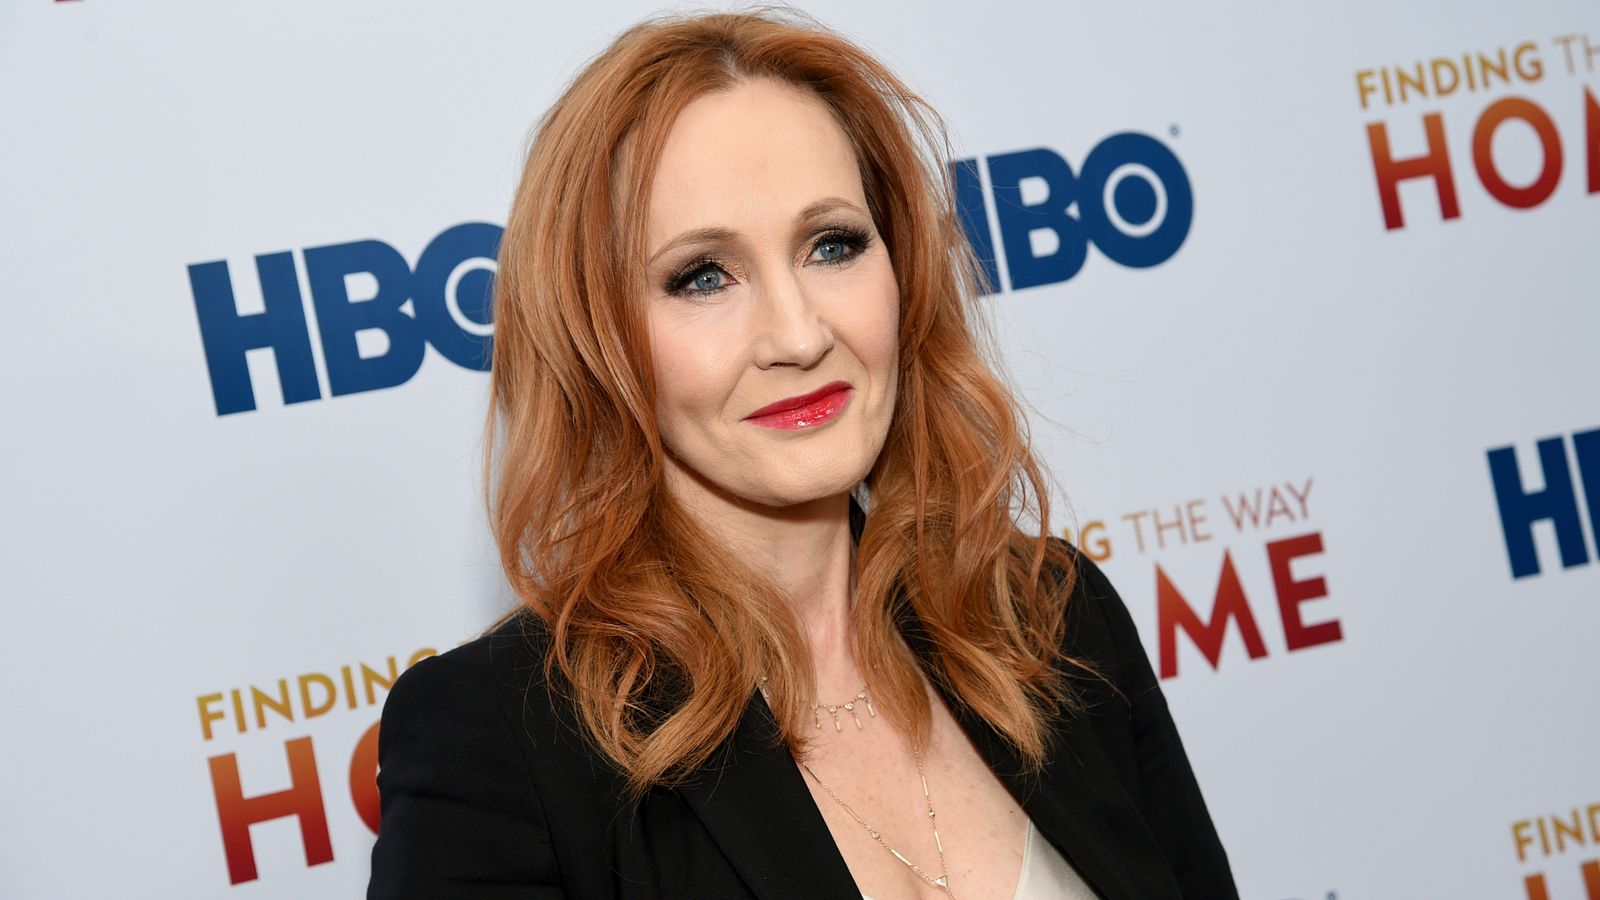 JK Rowling responds to backlash over 'anti-trans comments' - saying: 'I never set out to upset anyone'